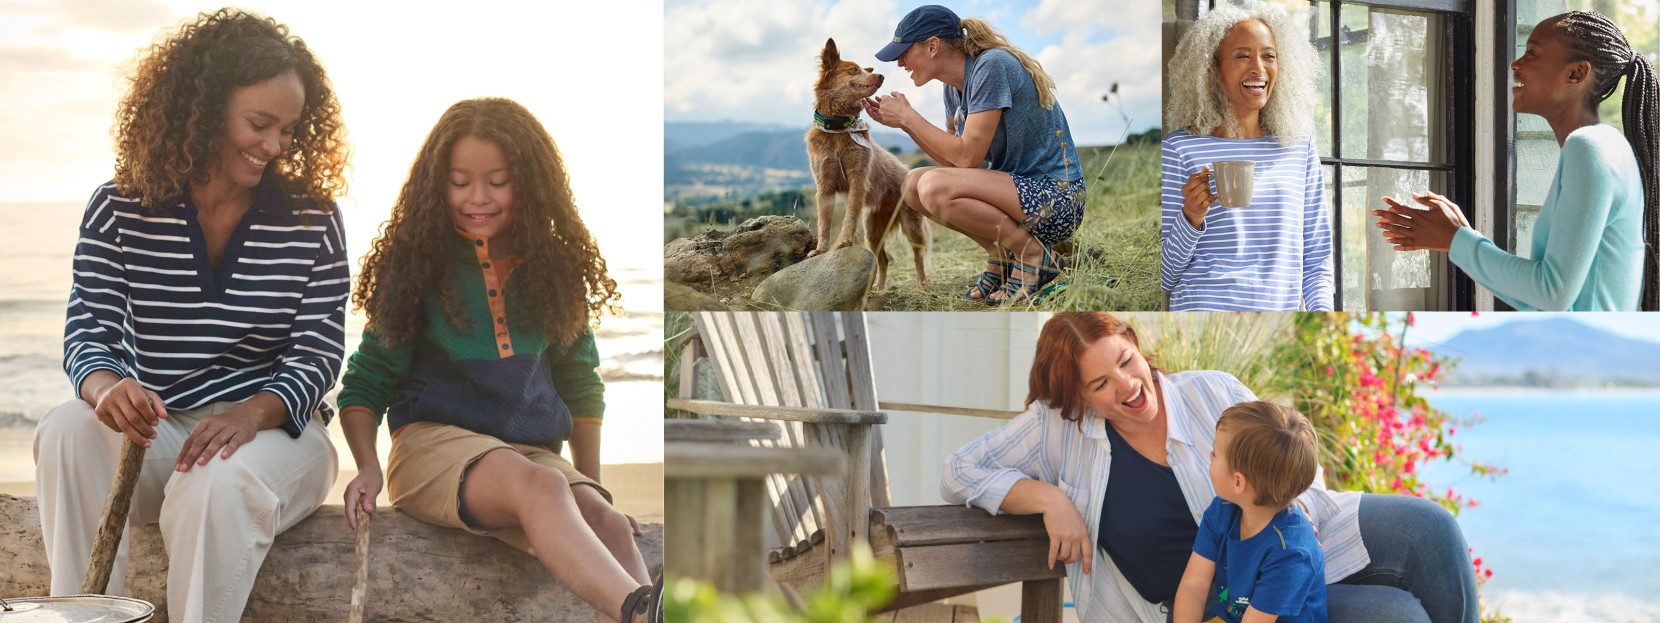 Collage of smiling moms and kids plus a dog in various outdoor settings.